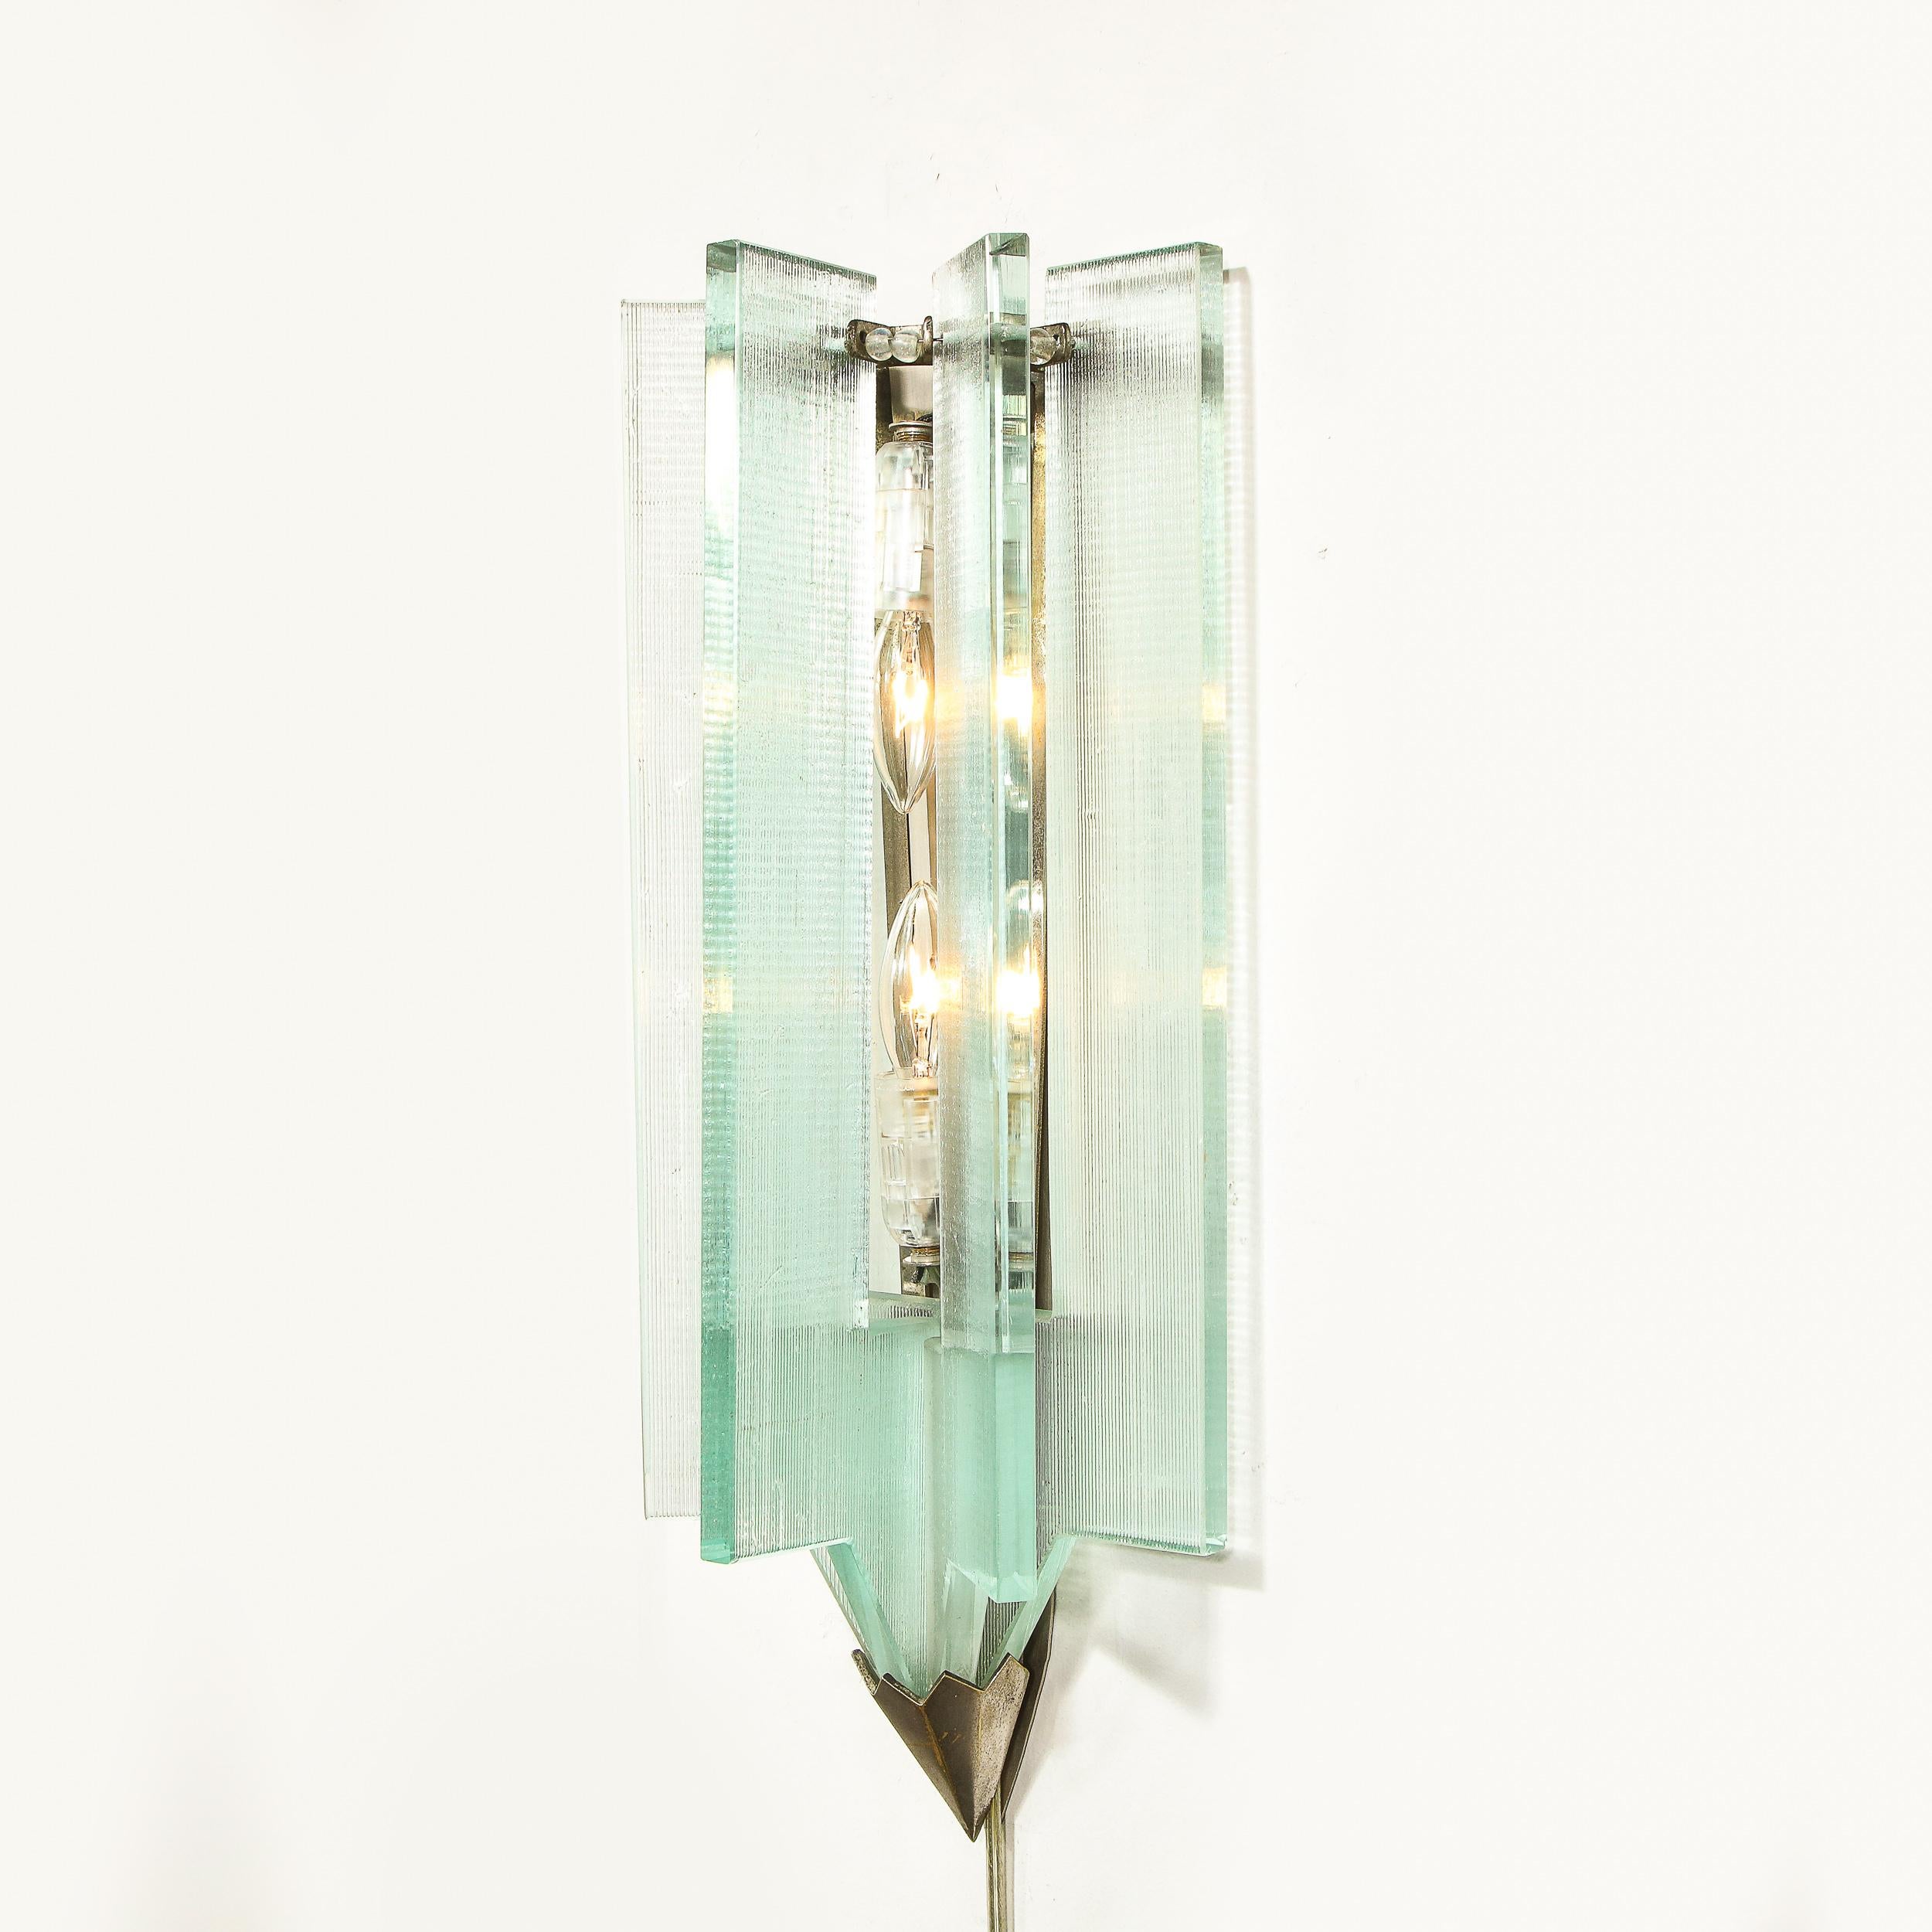 Mid-20th Century Mid-Century Modern Glass & Antique Nickel Sconce in the Manner of Fontana Arte For Sale